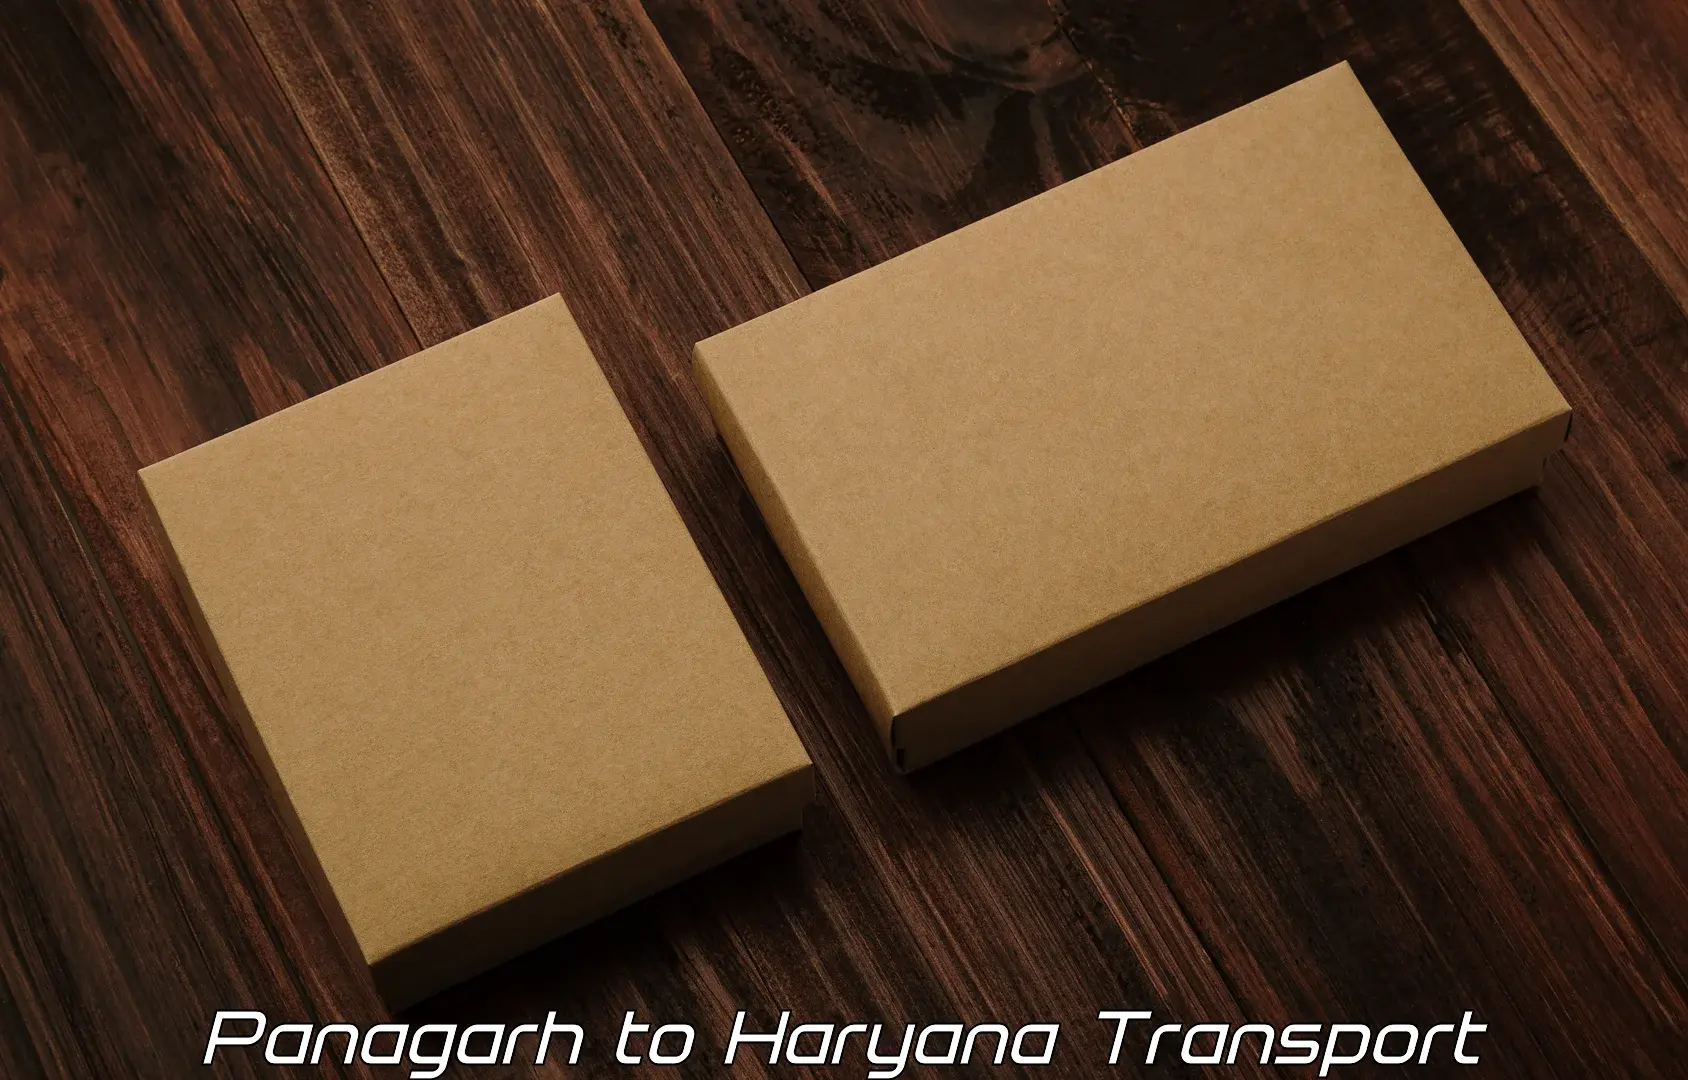 Vehicle transport services Panagarh to Sonipat